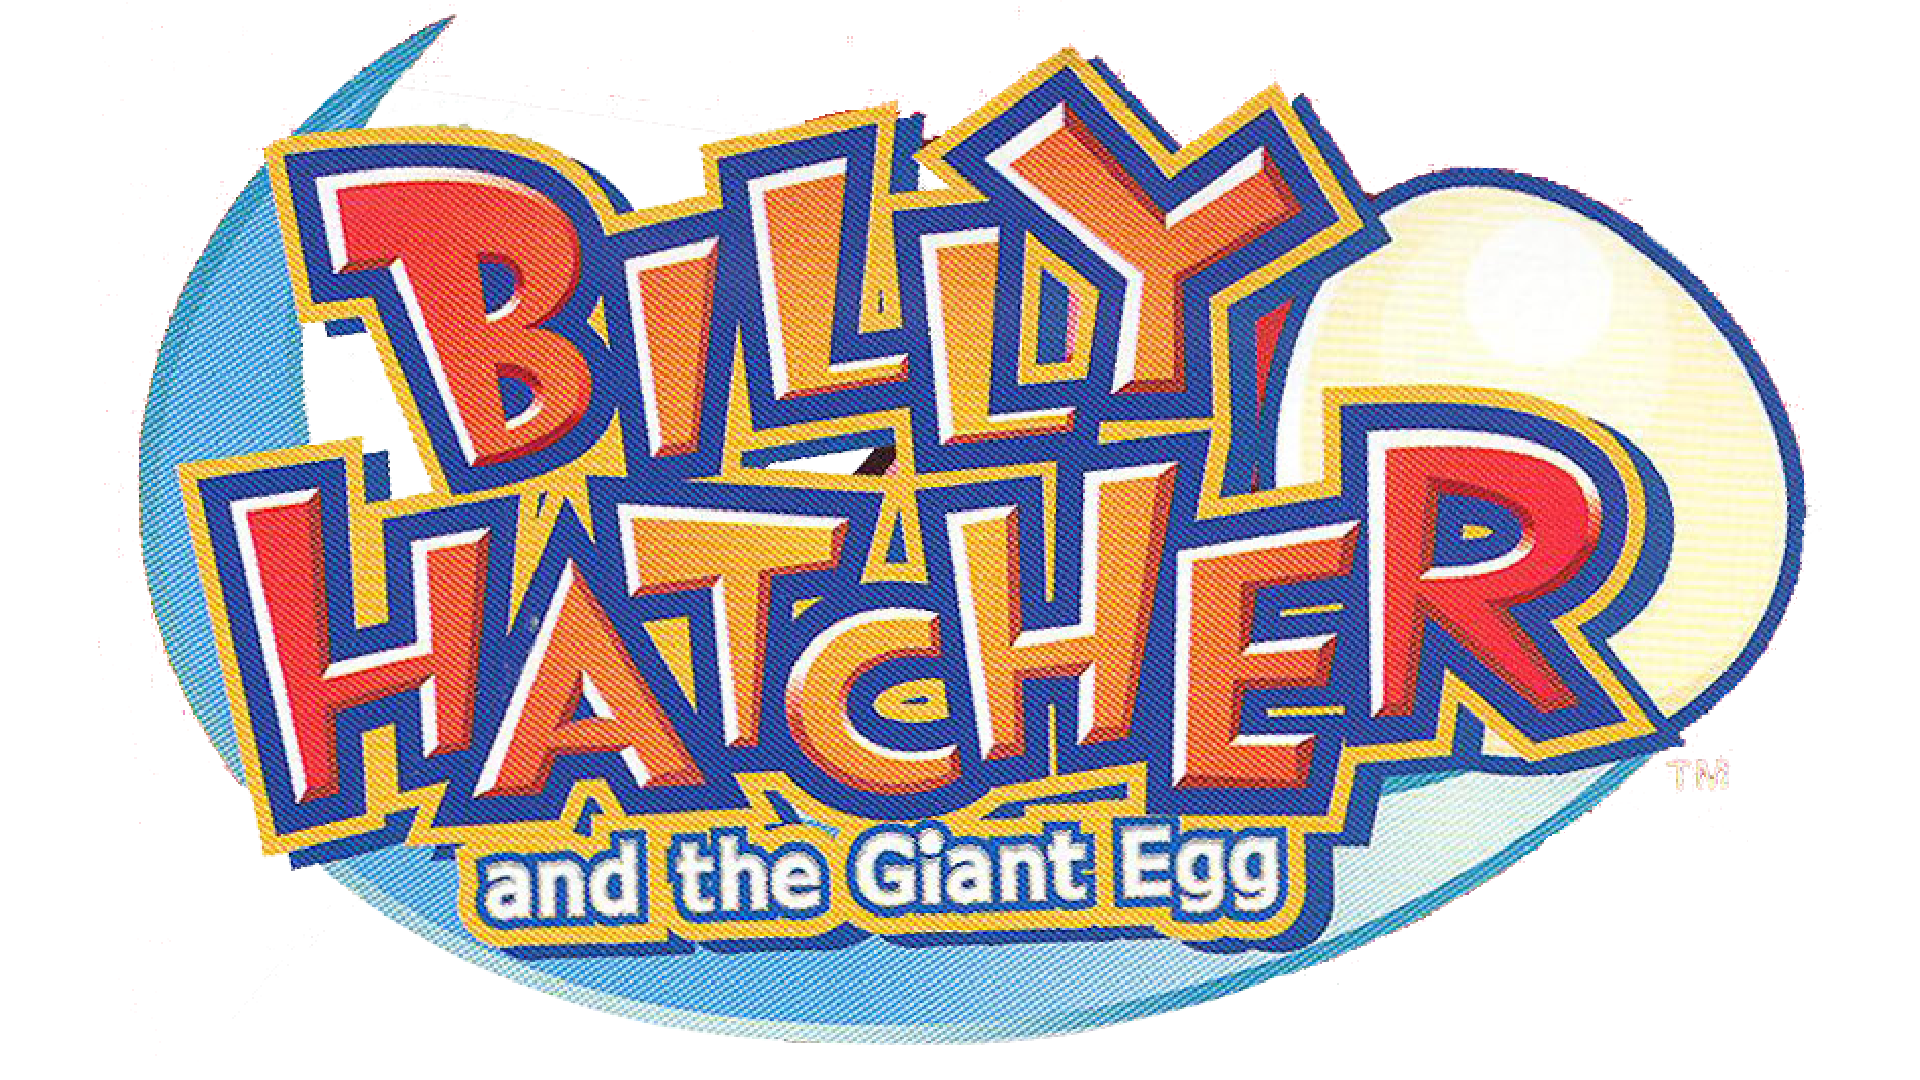 Billy Hatcher and the Giant Egg Logo